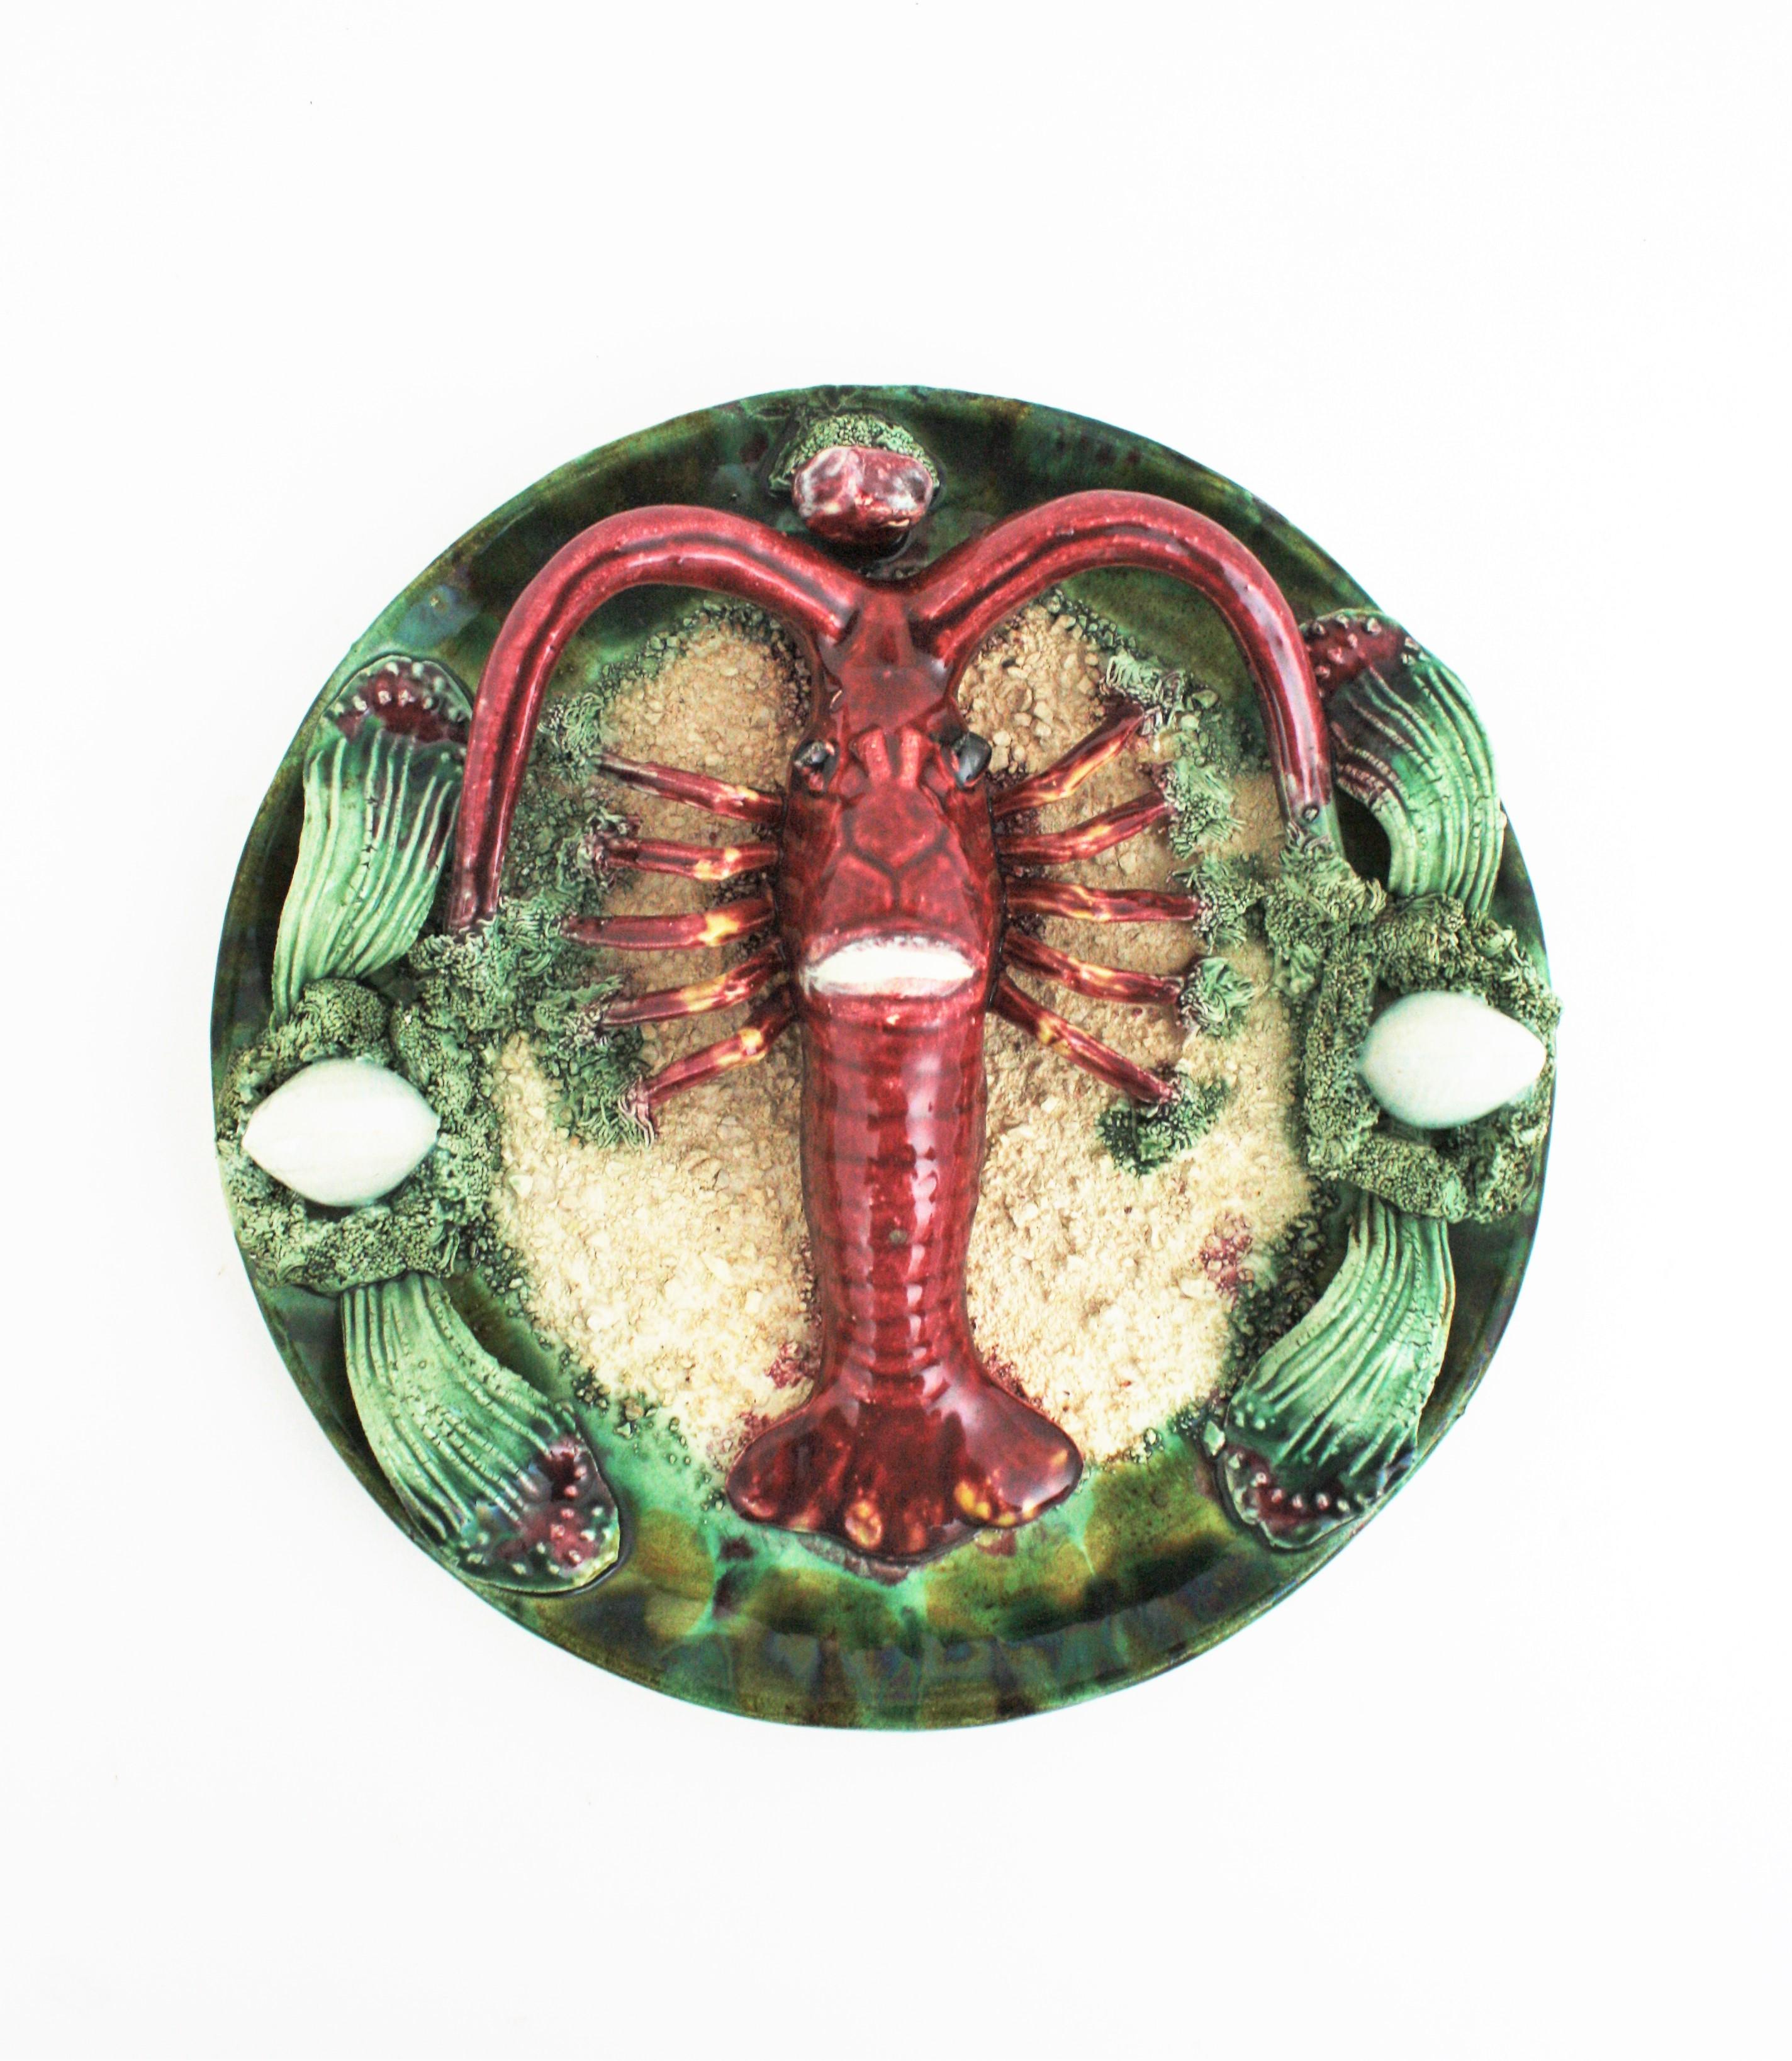 Trompe L' Oeil Crayfish Decorative wall plate in Majolica Ceramic, Portugal, 1940s-1950s.
Eye-catching hand painted plate in Majolica glazed ceramic crayfish on a sea landscape.
This plate will add a cool midcentury accent in a beach house